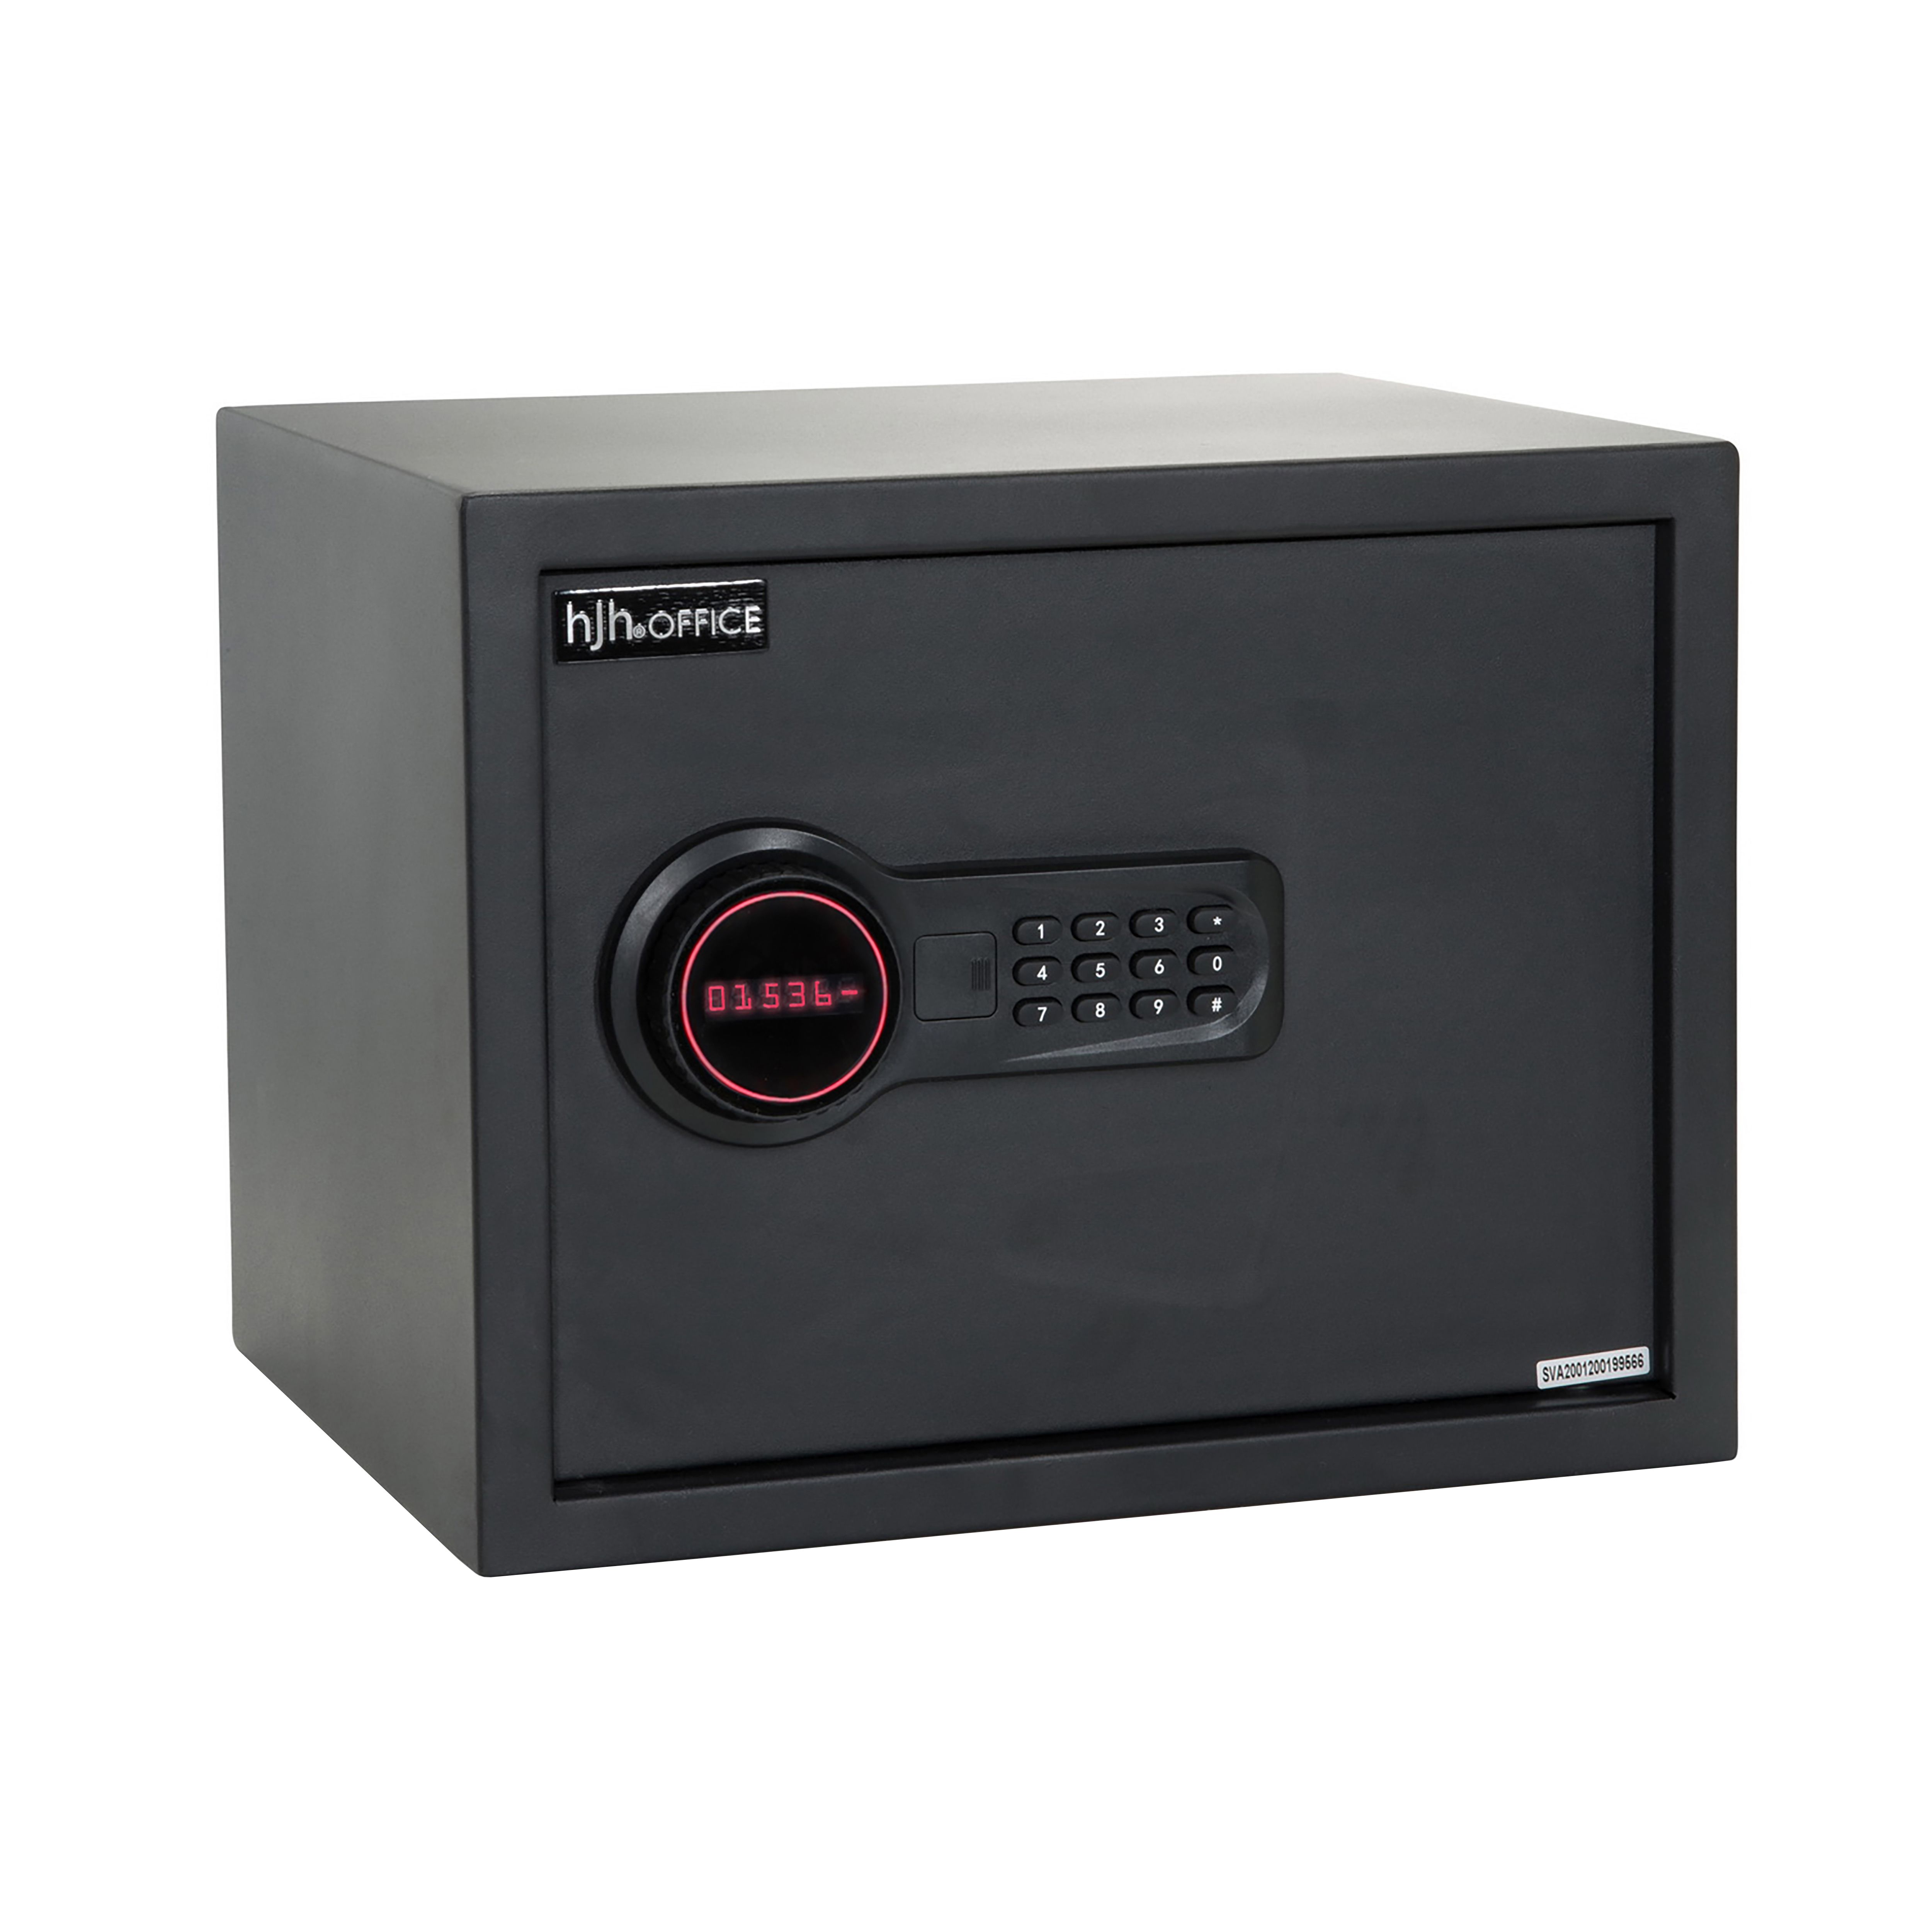 Safe / Tresor SAFE COMPACT 27l mit LCD Display hjh OFFICE